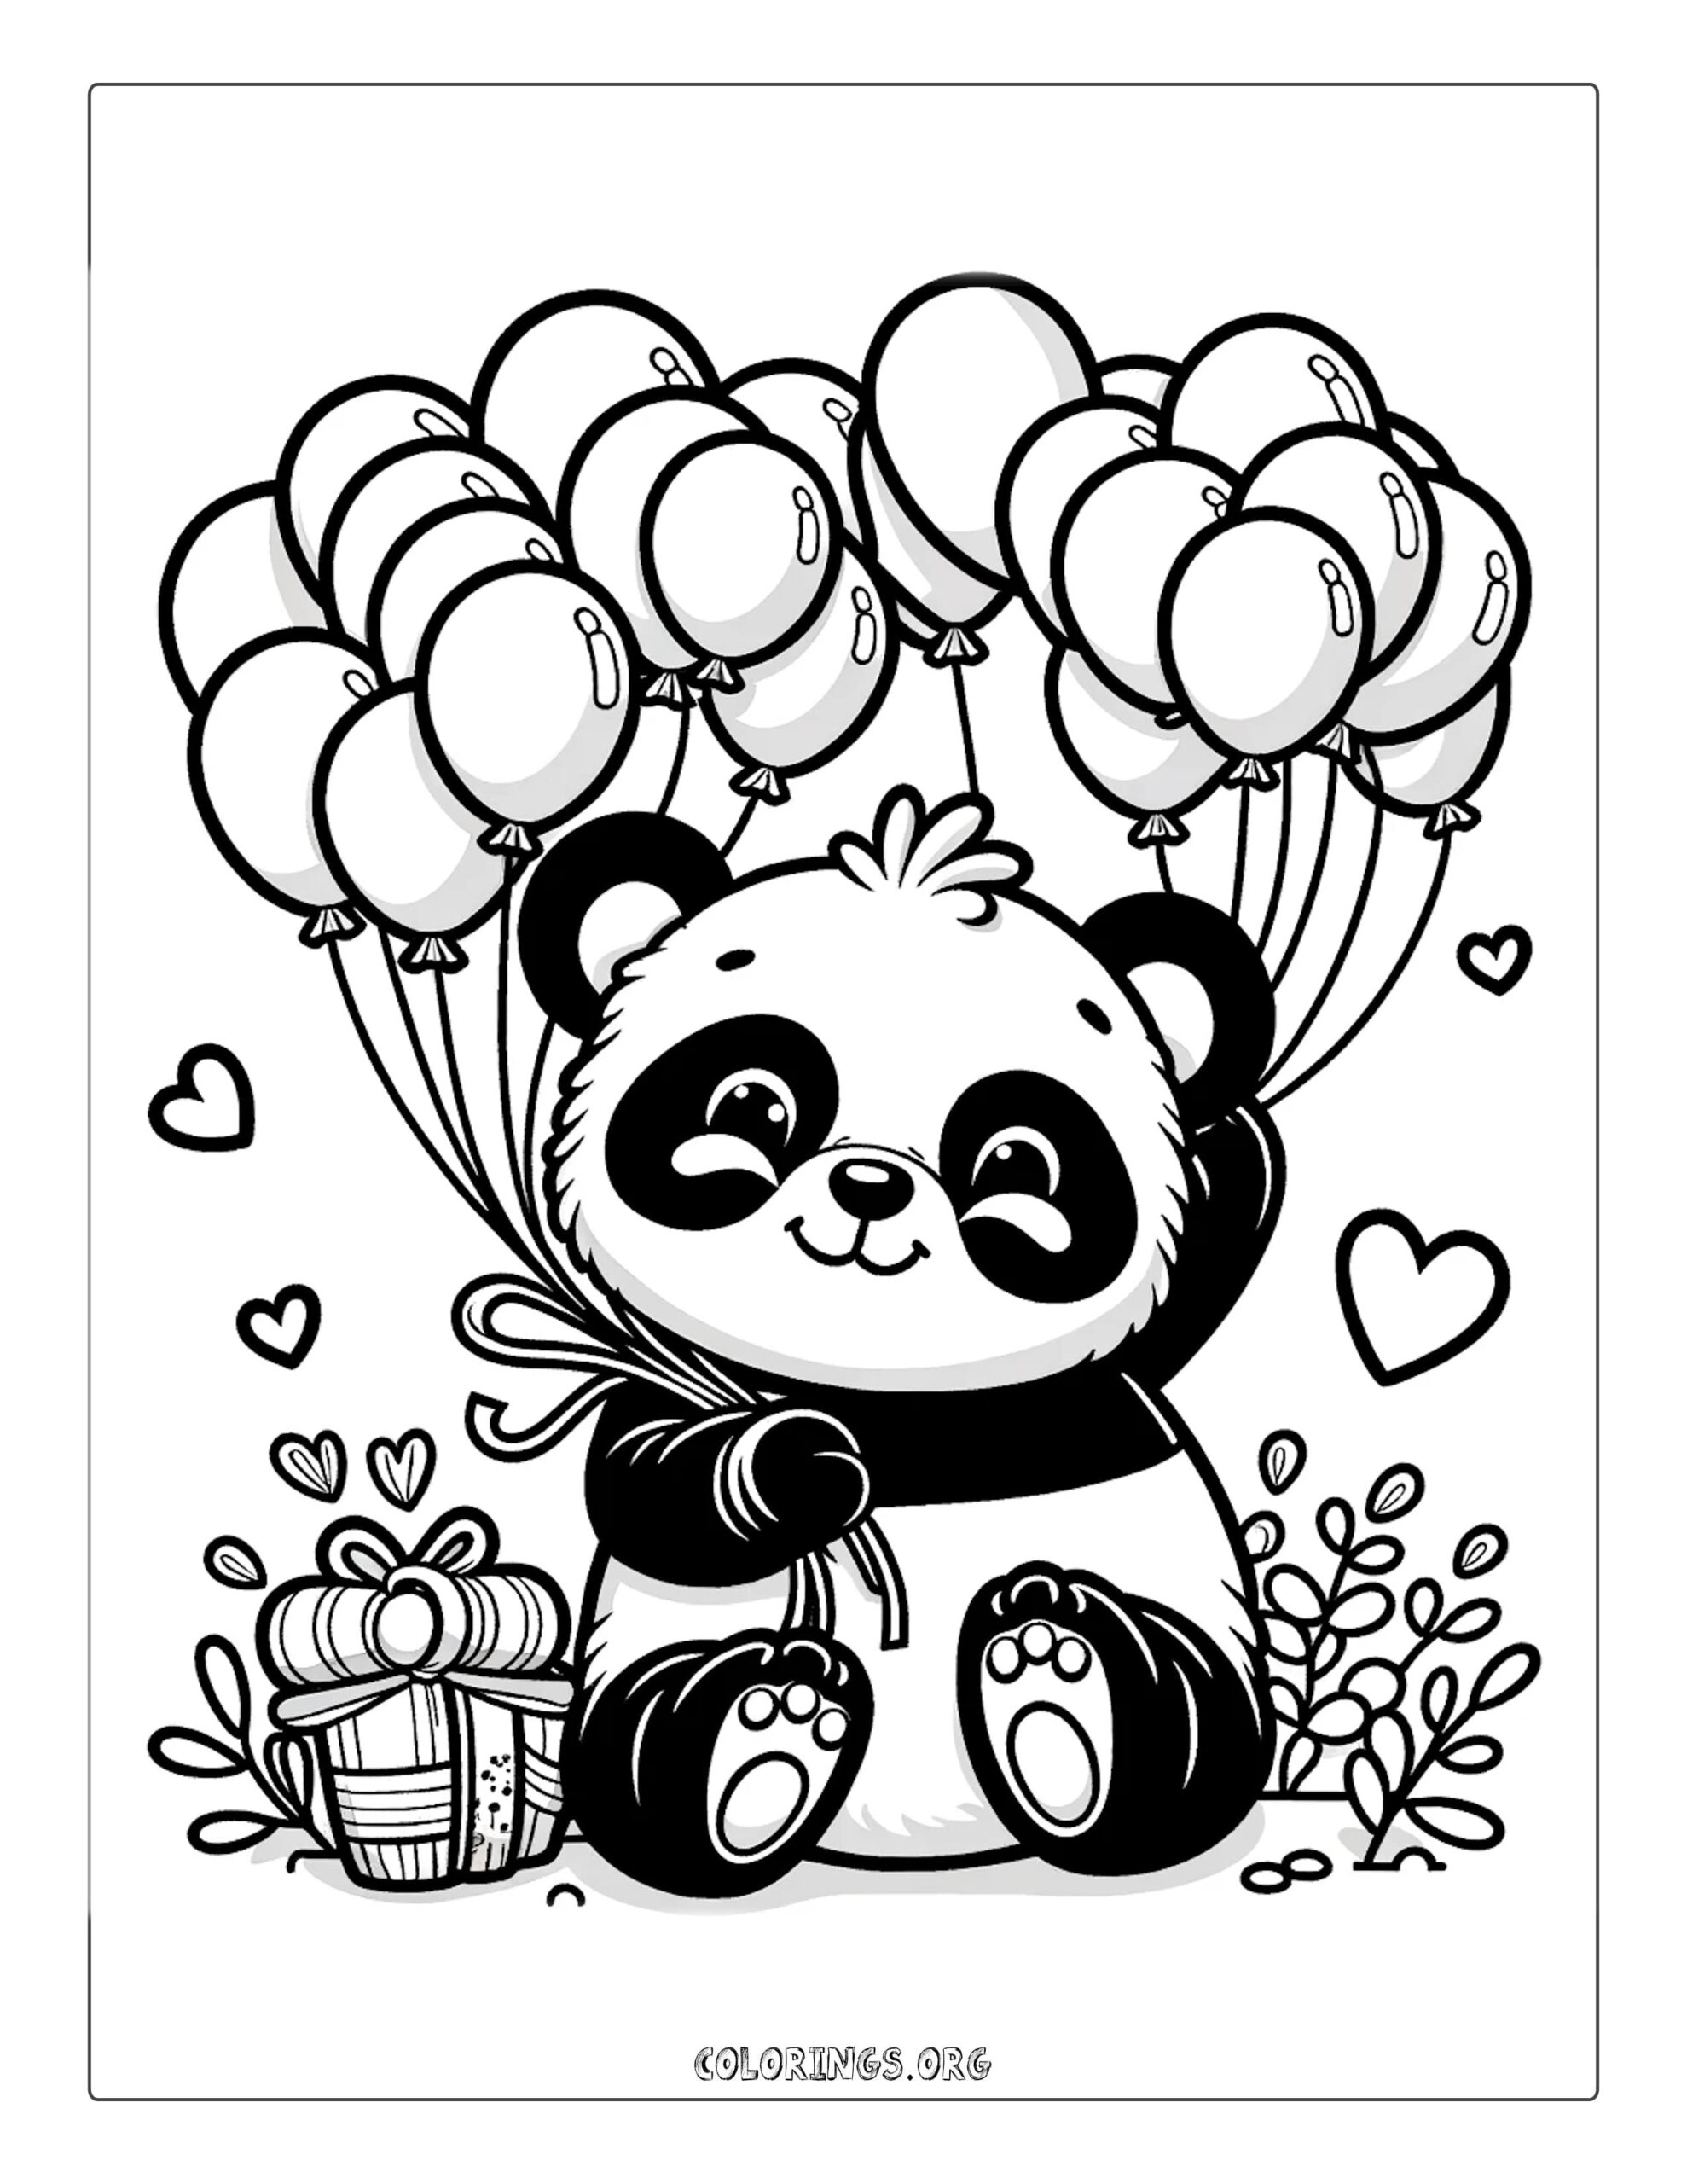 Happy Panda with Balloons Coloring Page